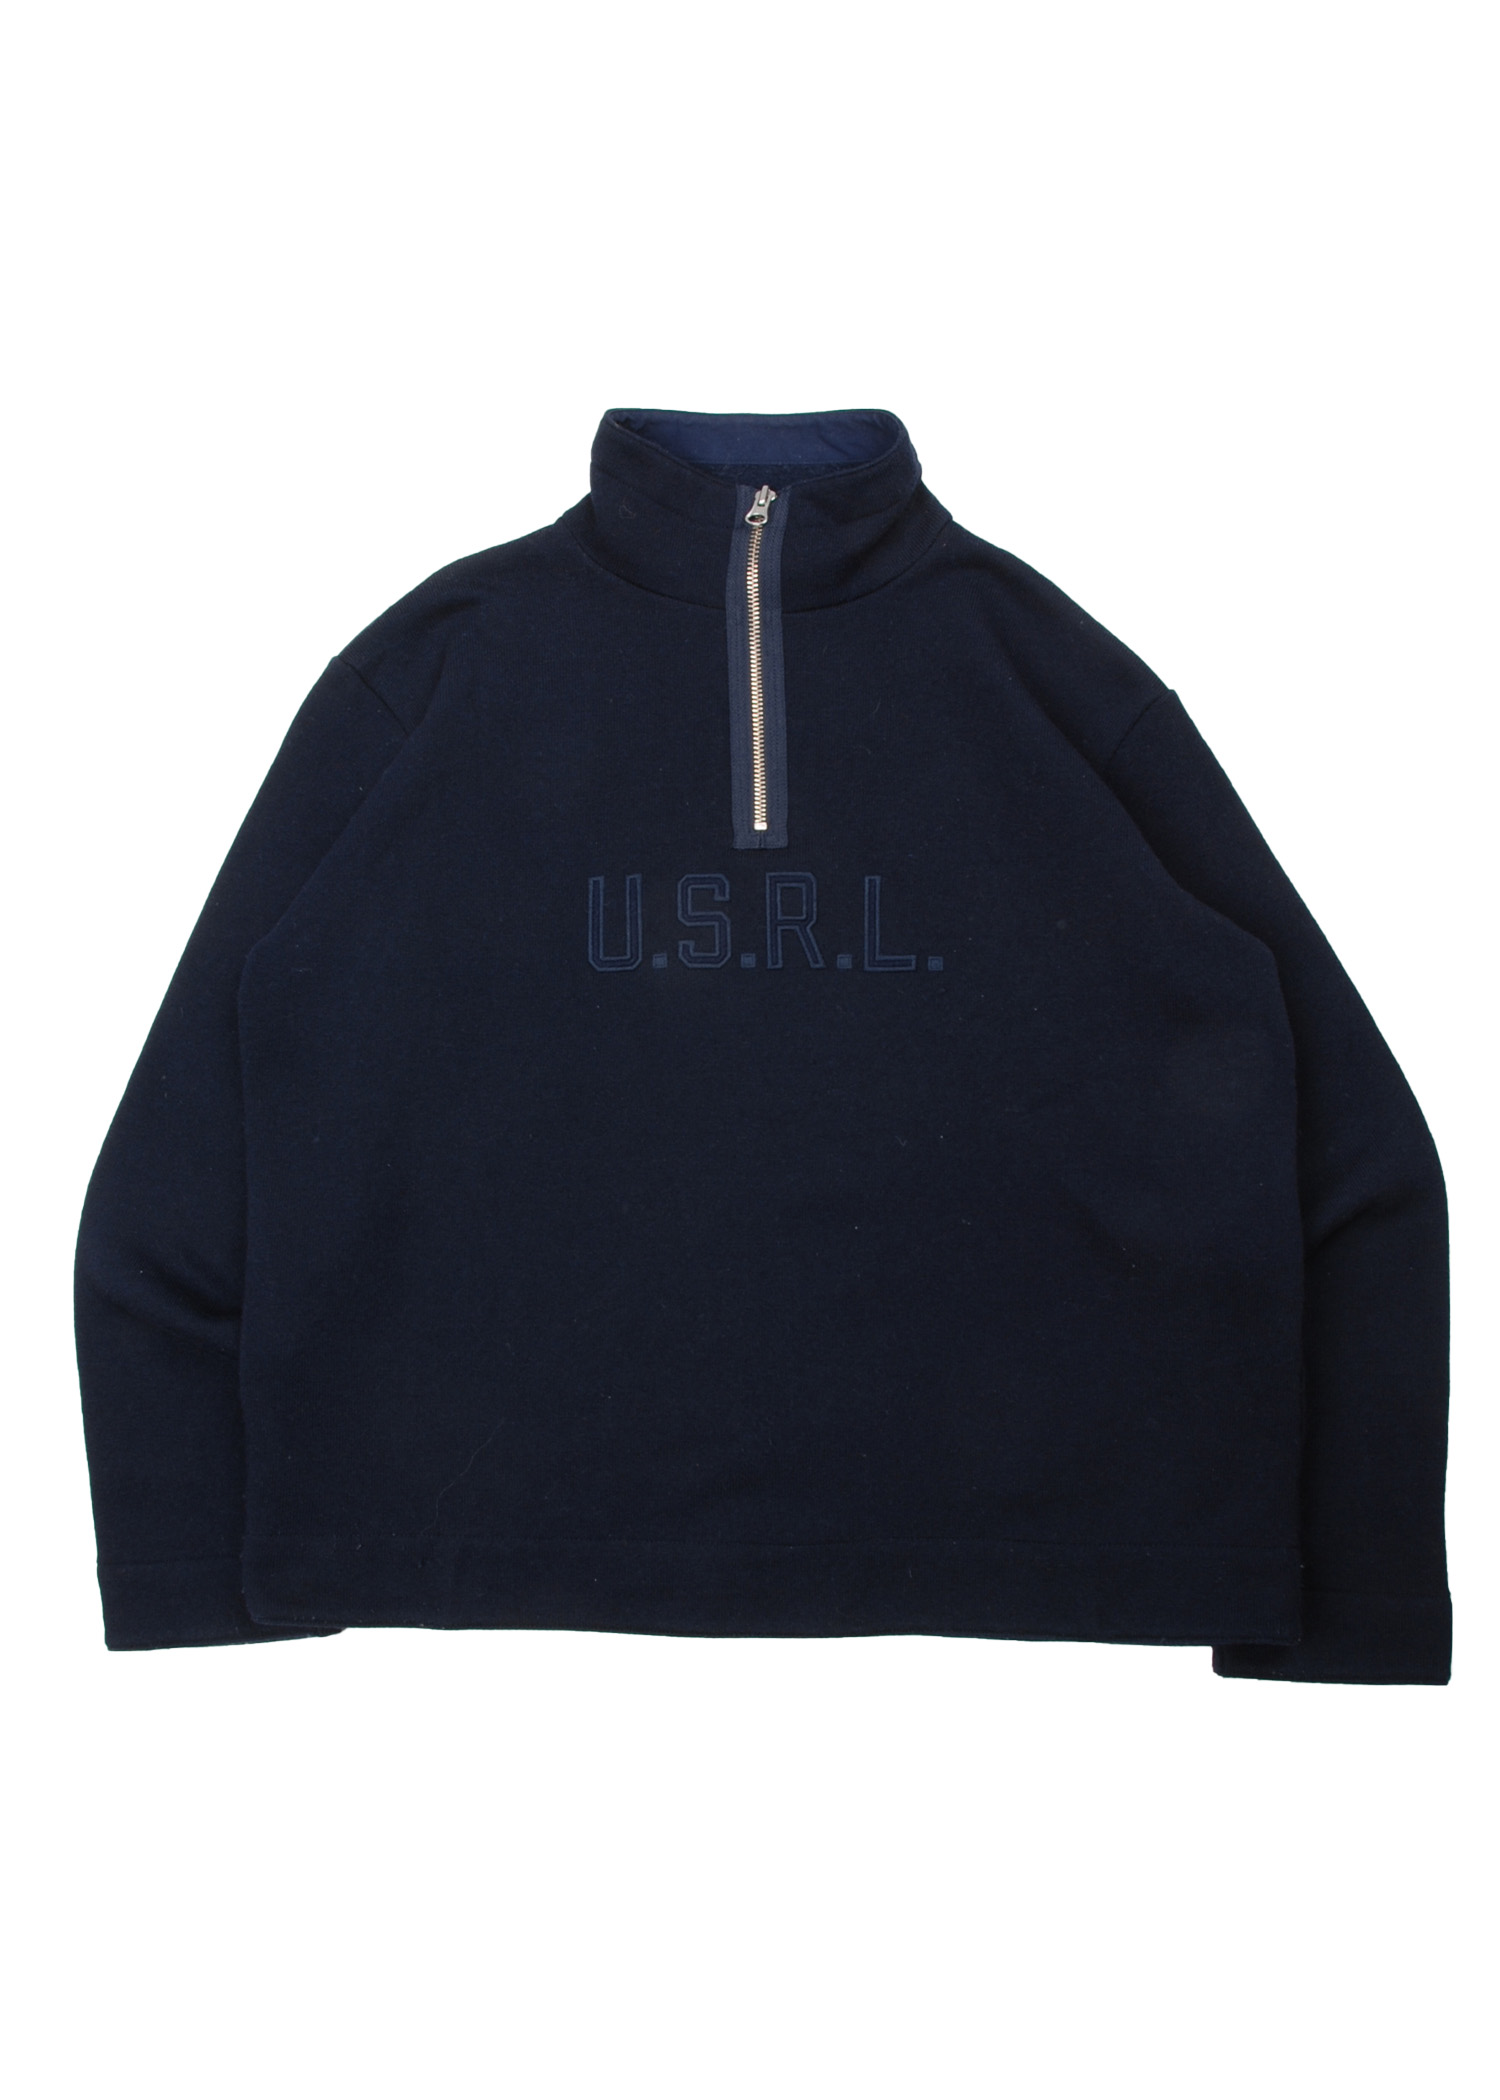 POLO SPORTS by Ralph Lauren pullover sweat